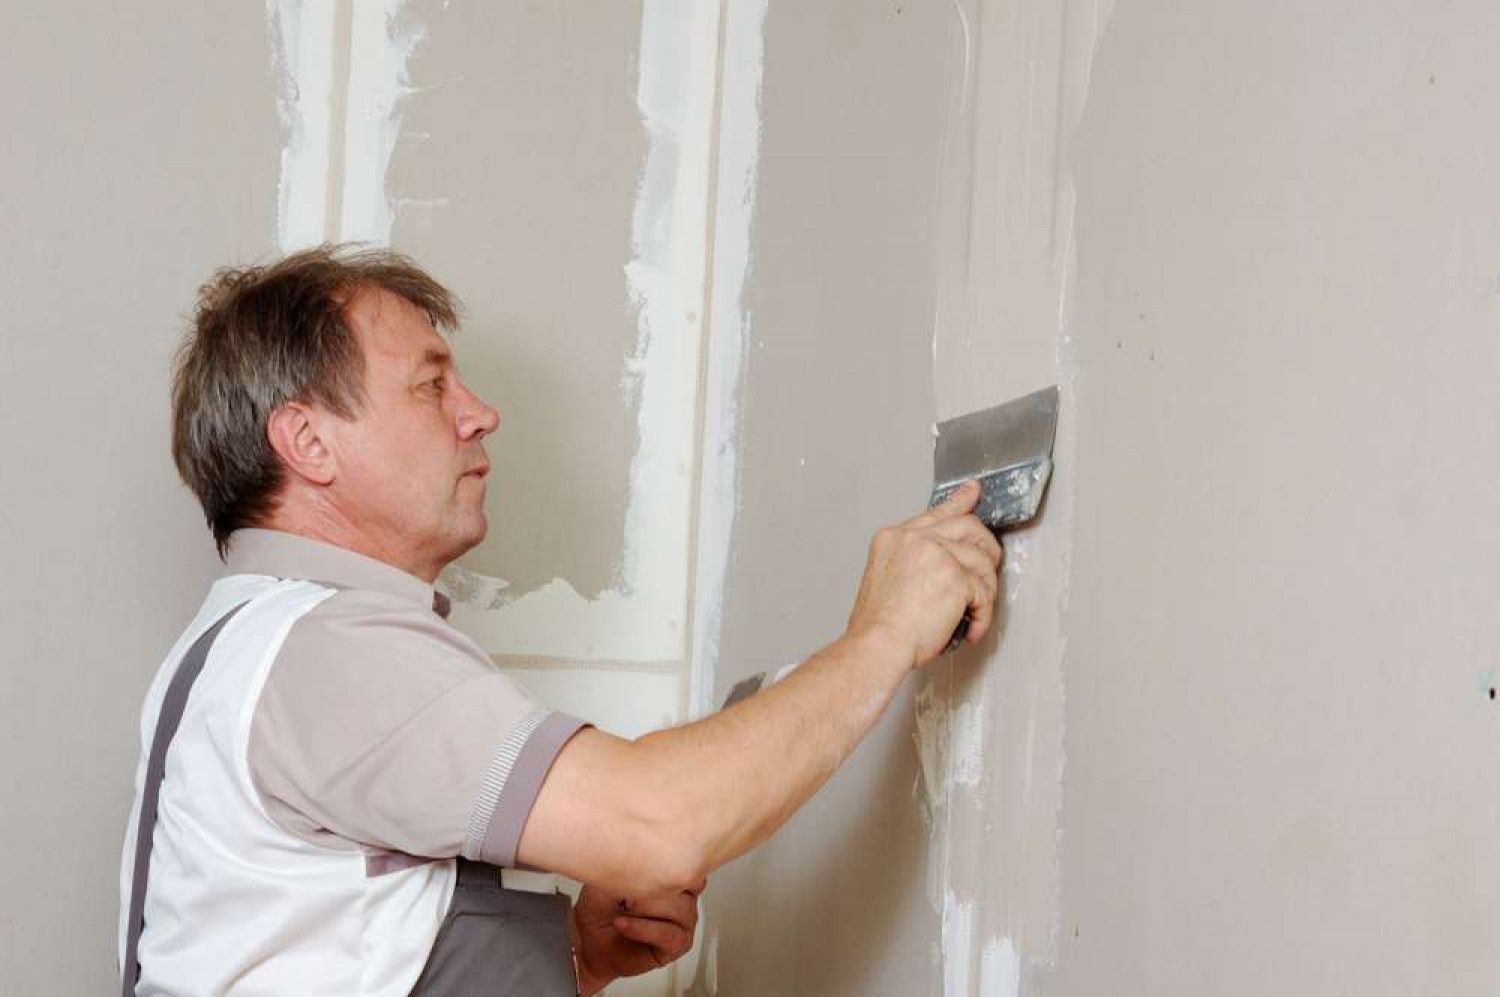 Drywall Patching Services in La Mesa, CA